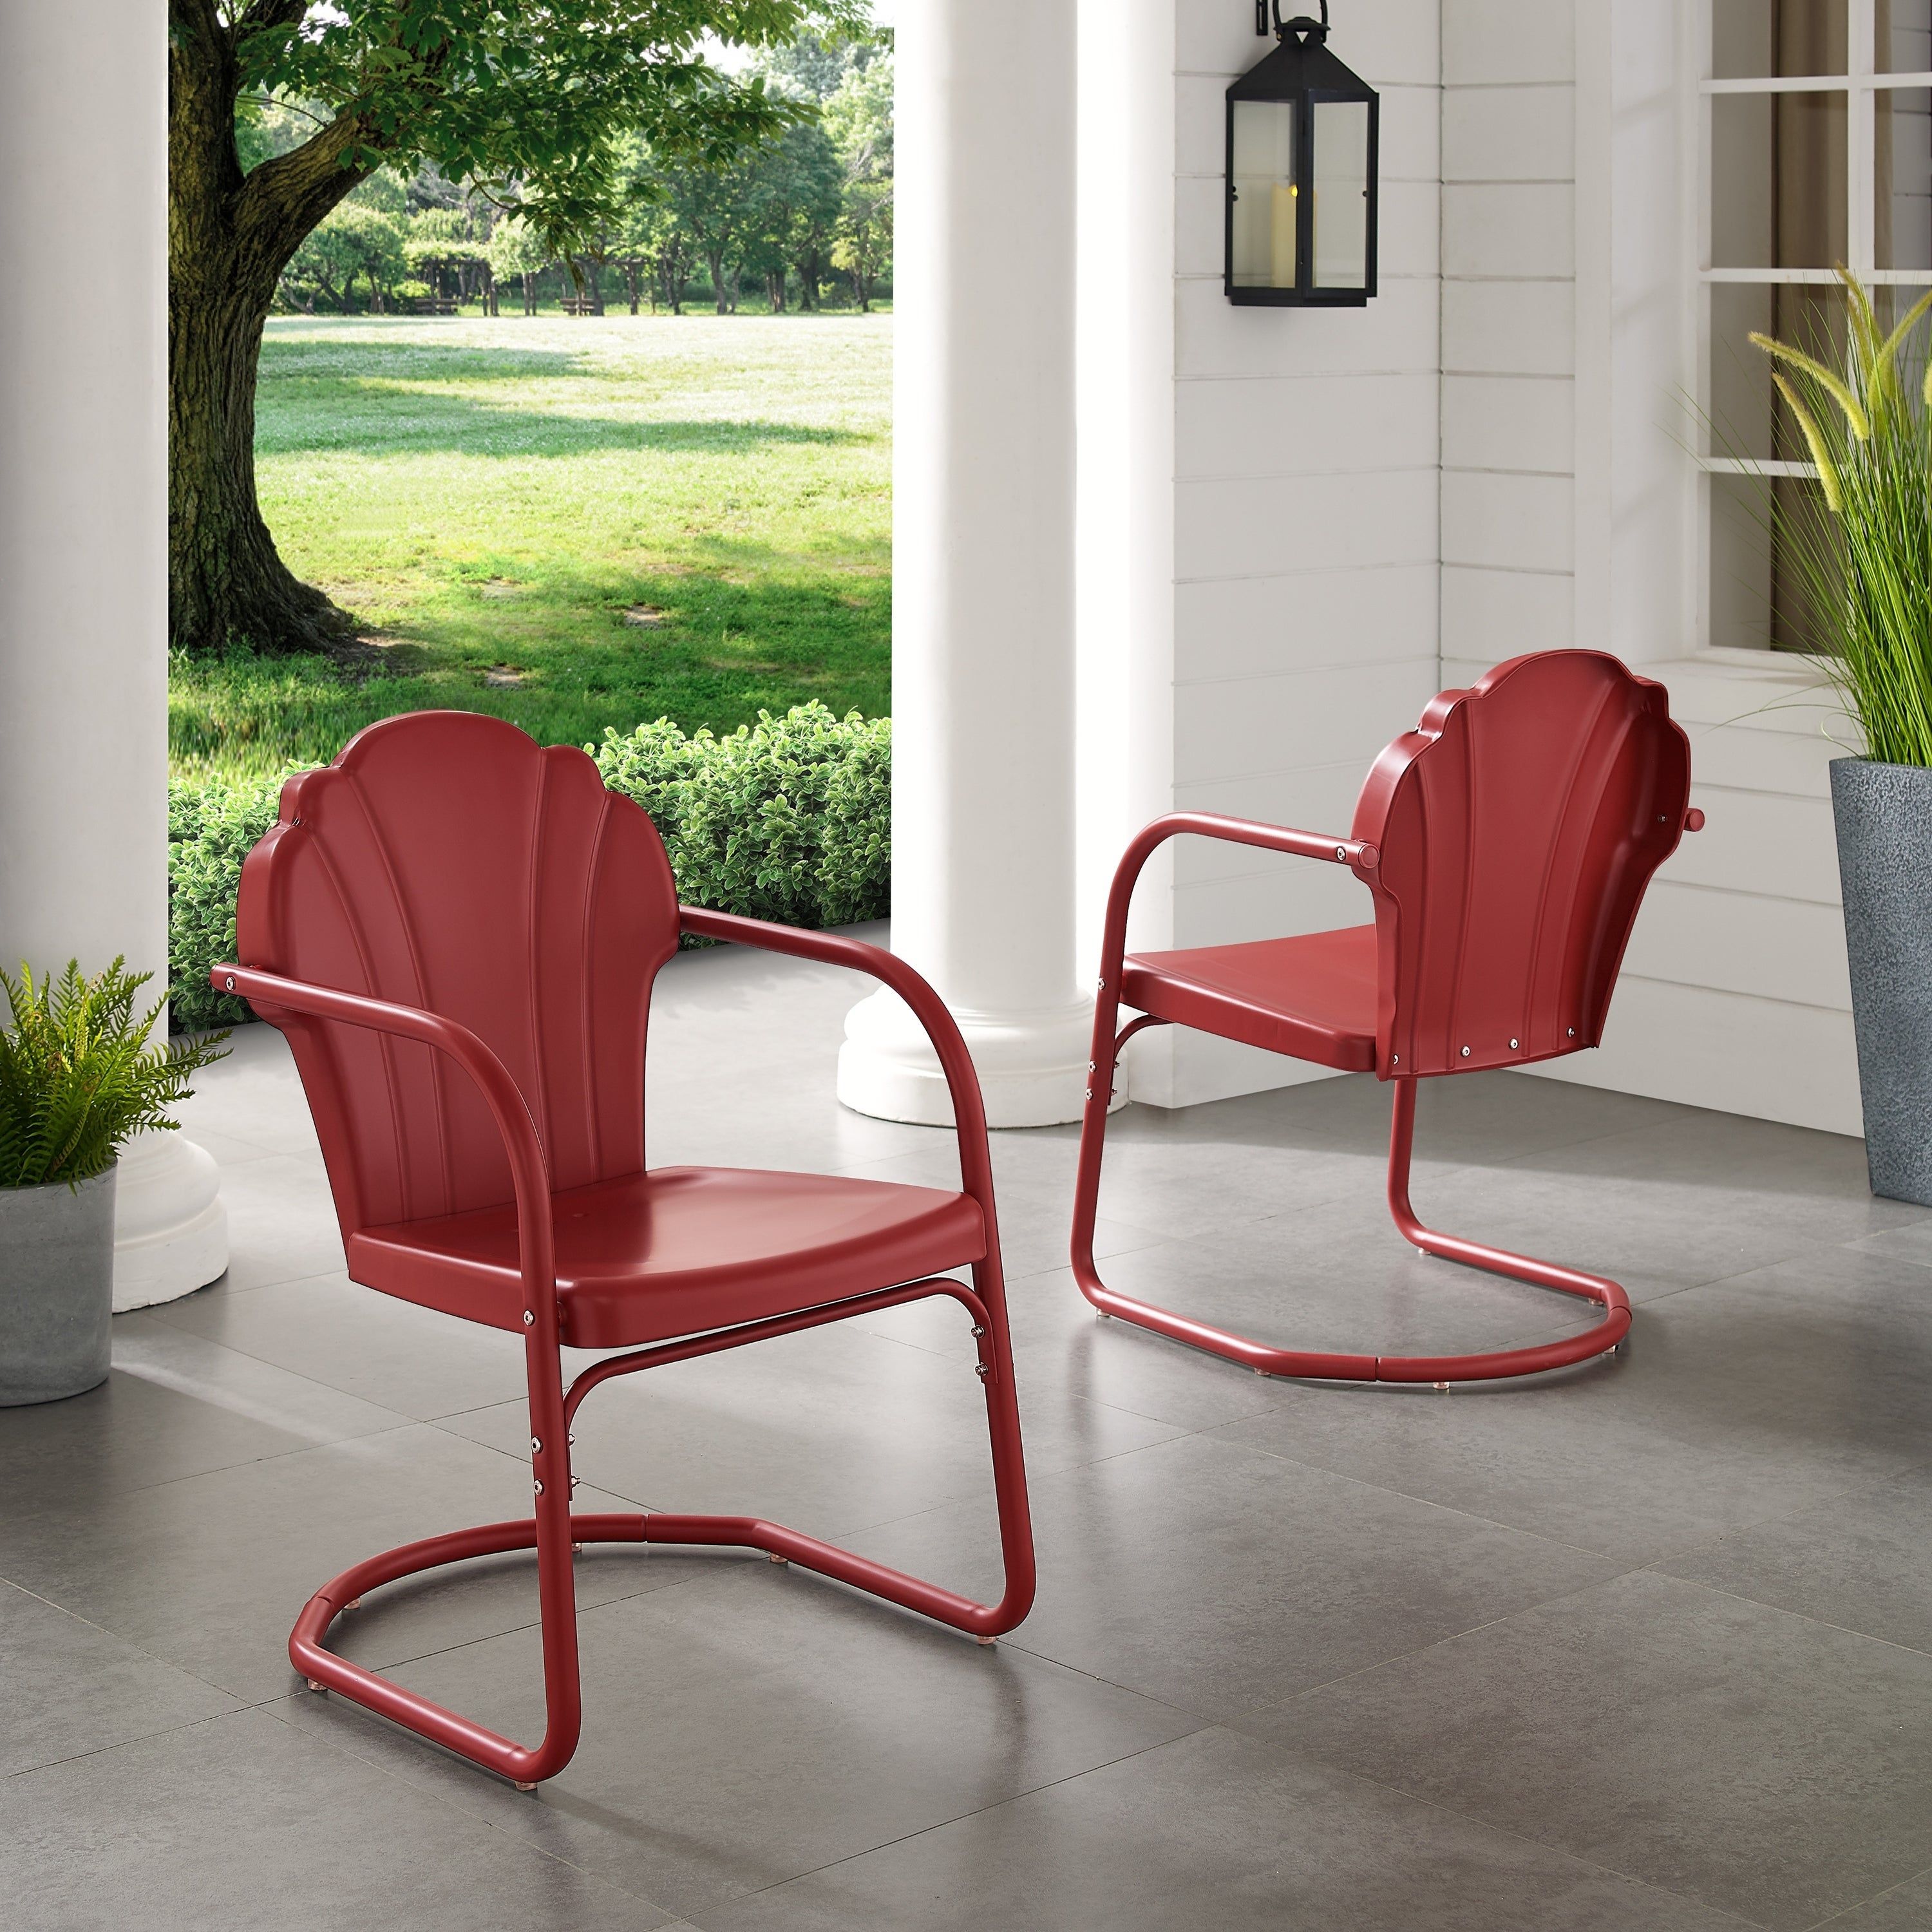 Havenside Home Diana Bay Red Retro Metal Chairs (Set Of 2) With Recent Bate Red Retro 3 Piece Dining Sets (View 10 of 20)